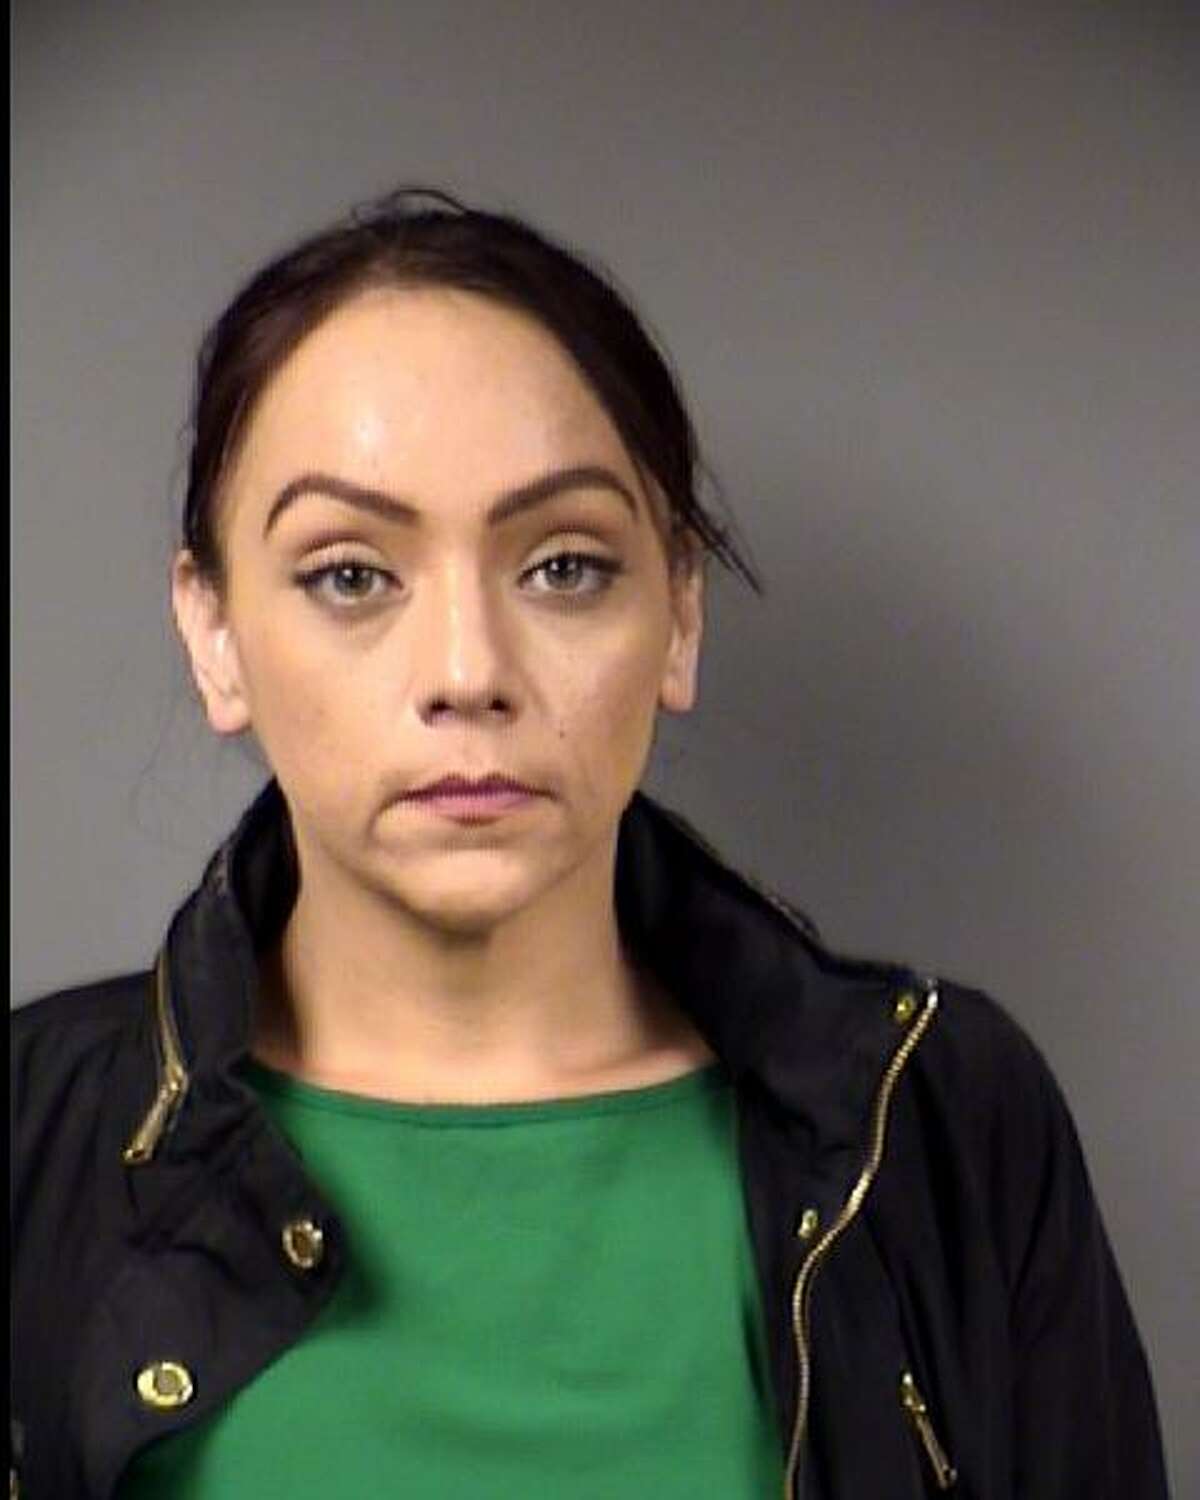 Priscilla Ann Salais, 37, was arrested on two counts of child endangerment on Tuesday, Jan. 11, 2022. She is accused of leaving two toddlers alone and tied up in a Southeast Side home in San Antonio.